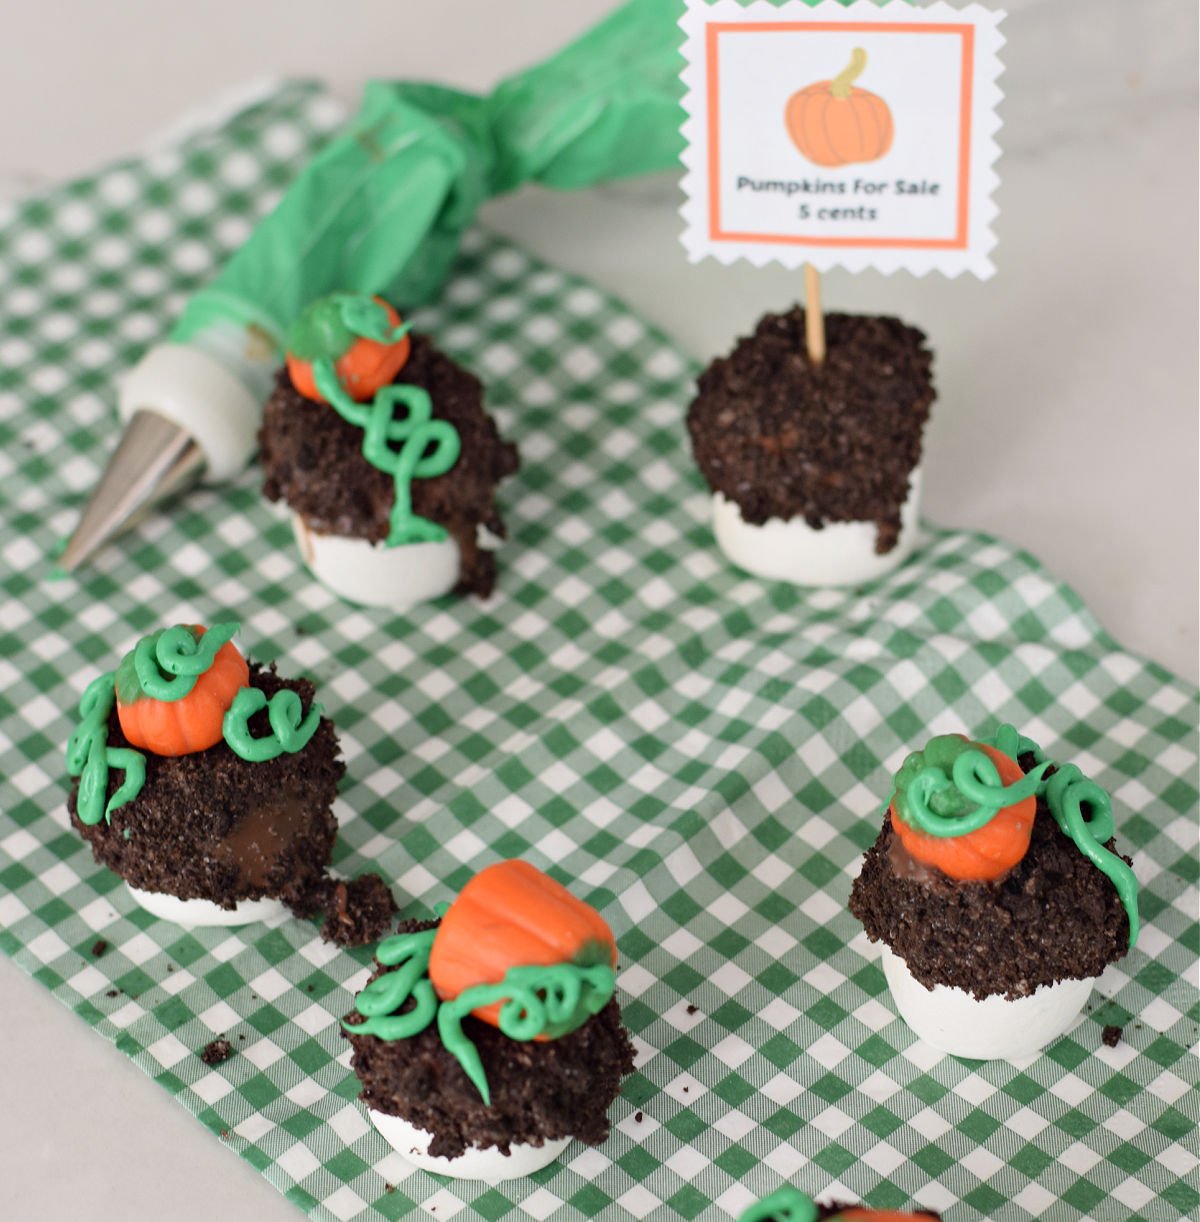 You are currently viewing Pumpkin Patch Chocolate Covered Marshmallow Bites